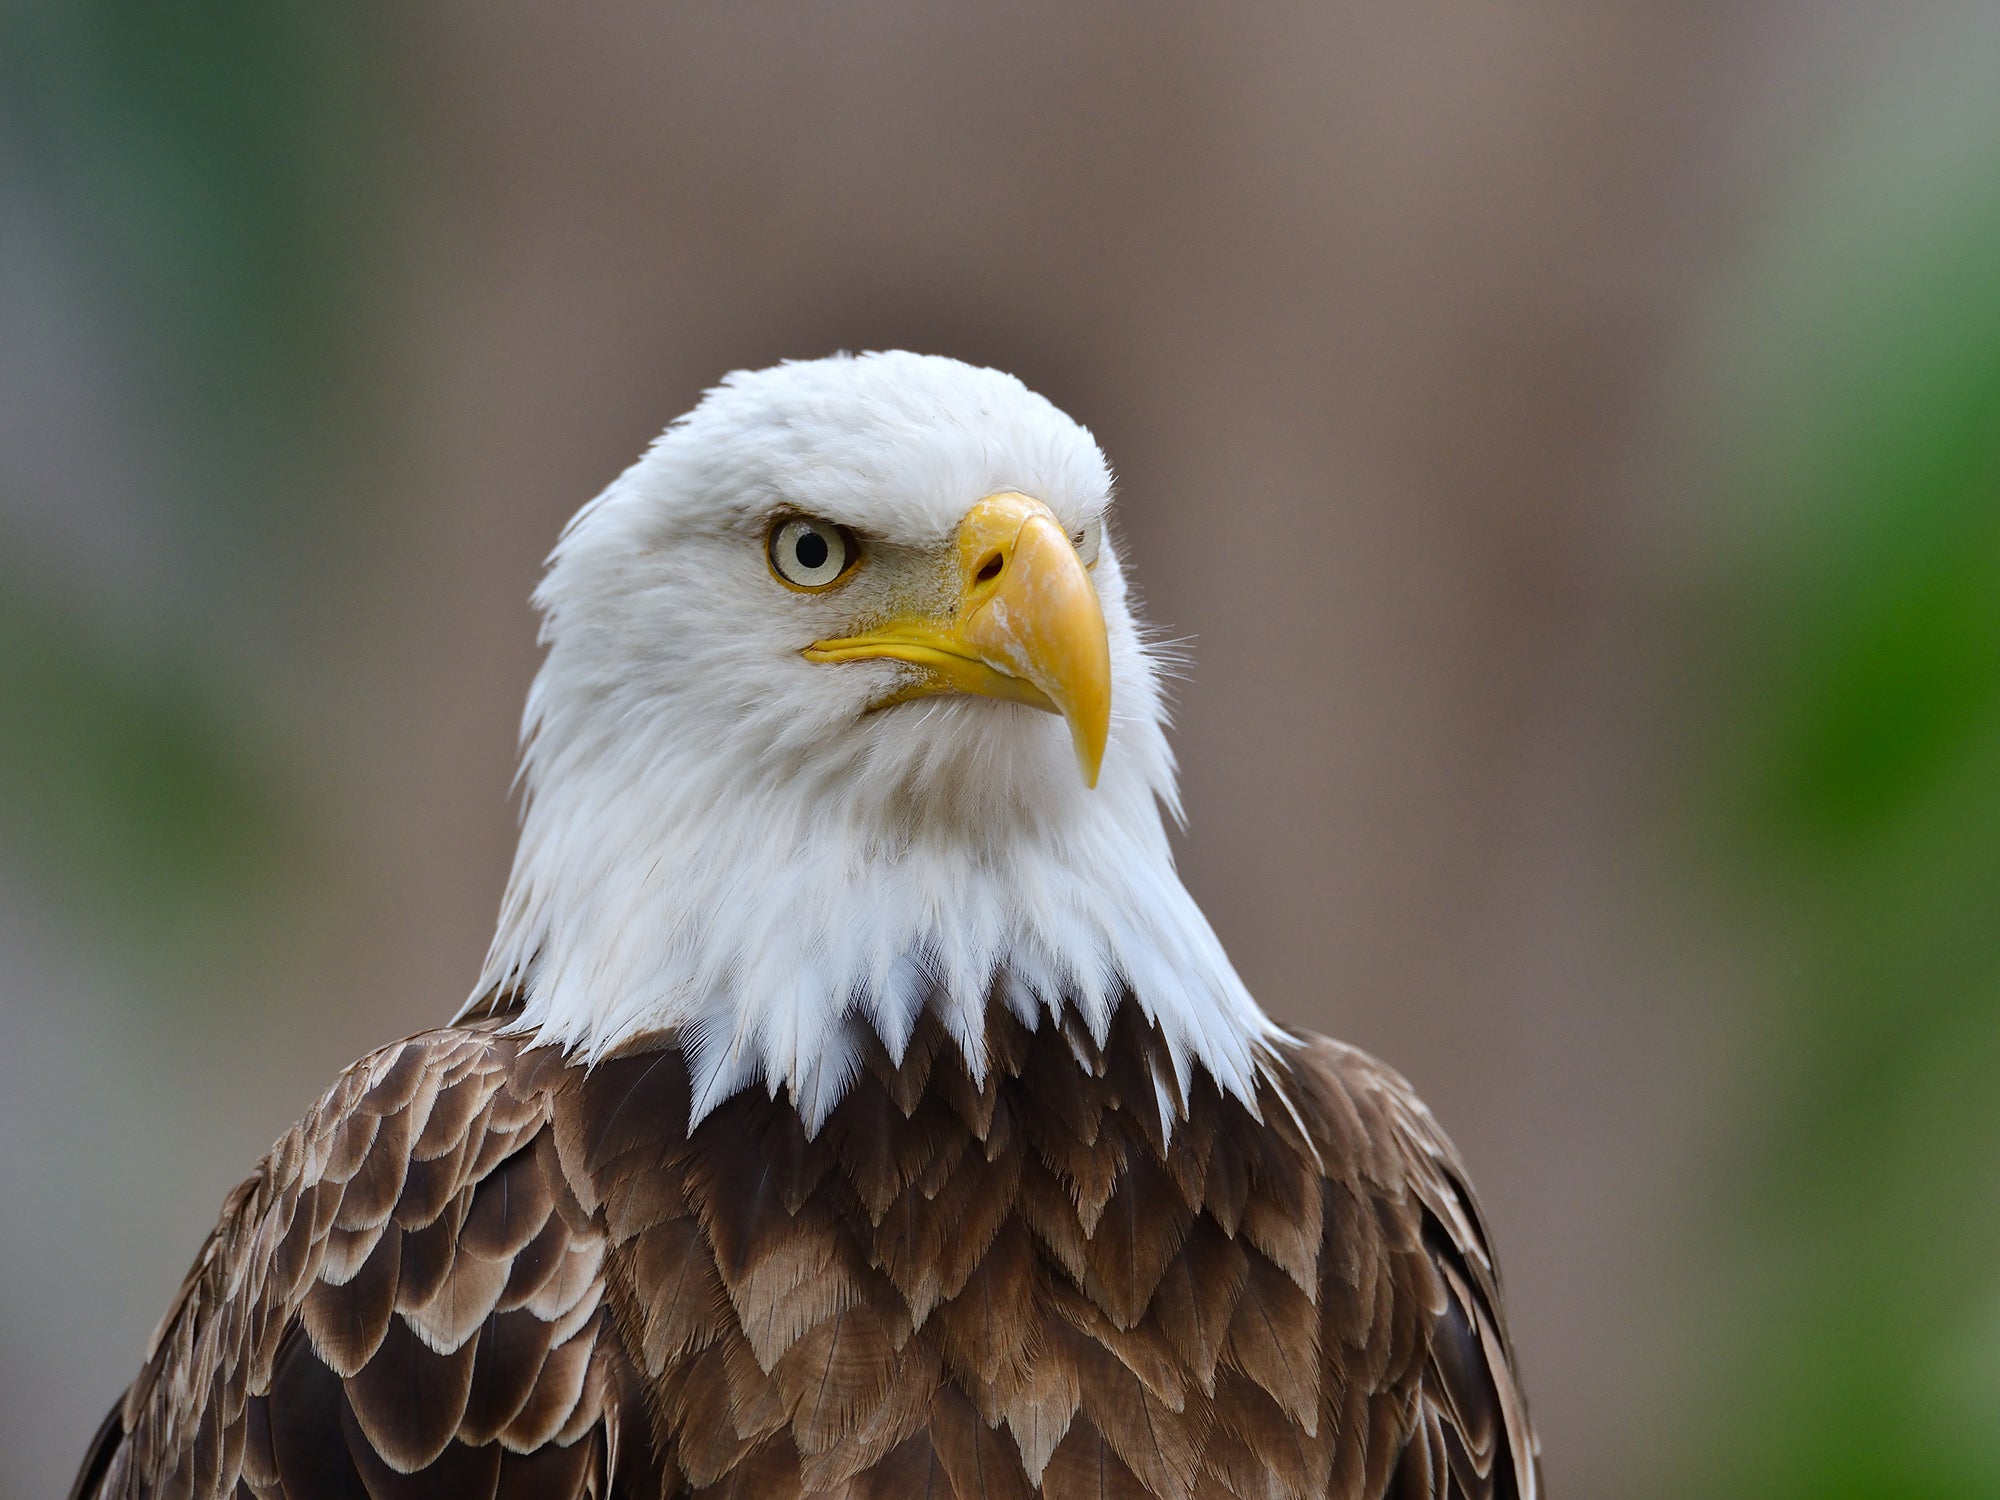 Why a wind strength company pled responsible to killing 100 safe eagles